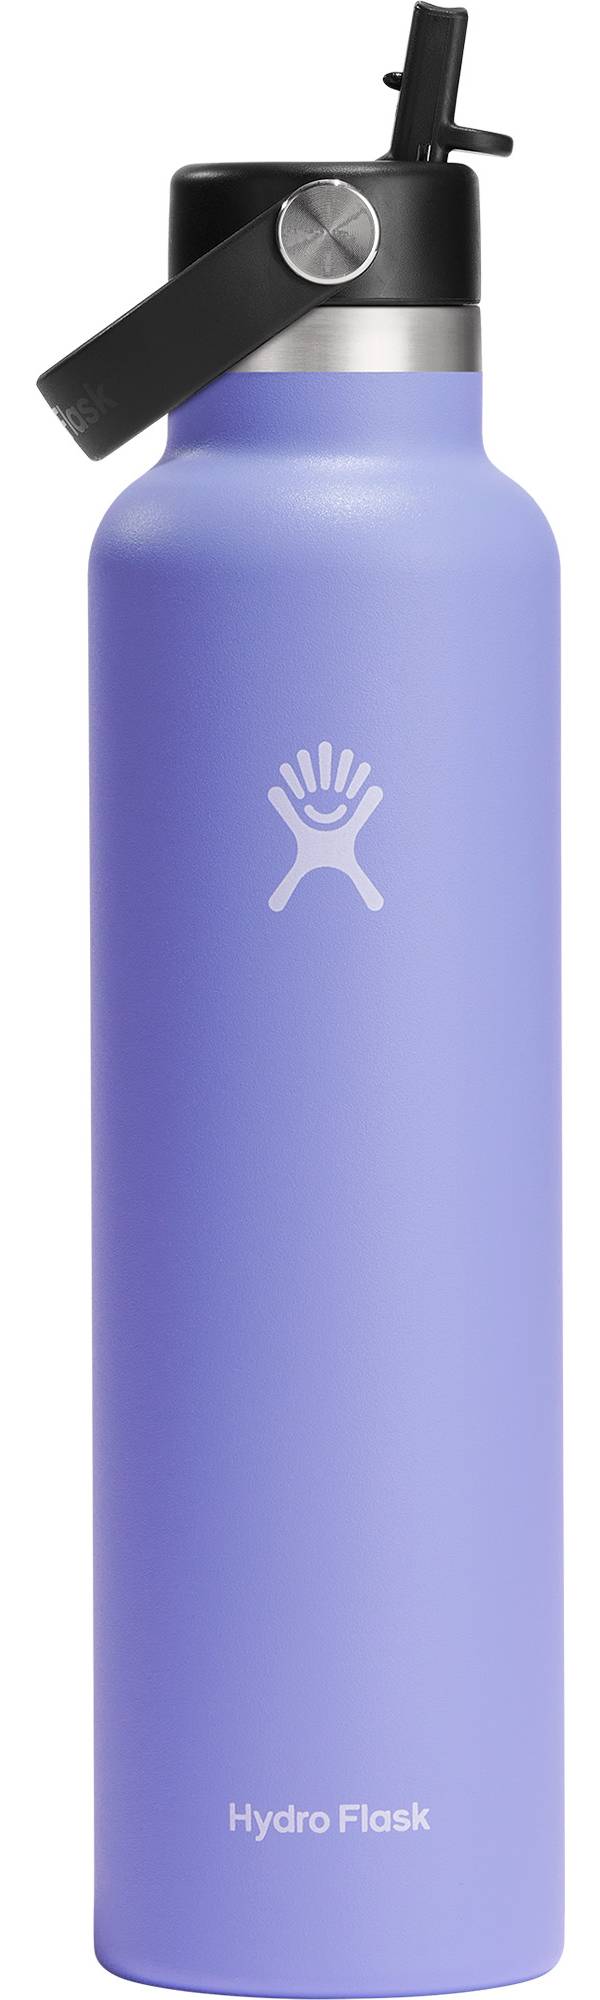 Hydro Flask 24 oz. Standard Mouth Bottle with Flex Straw product image